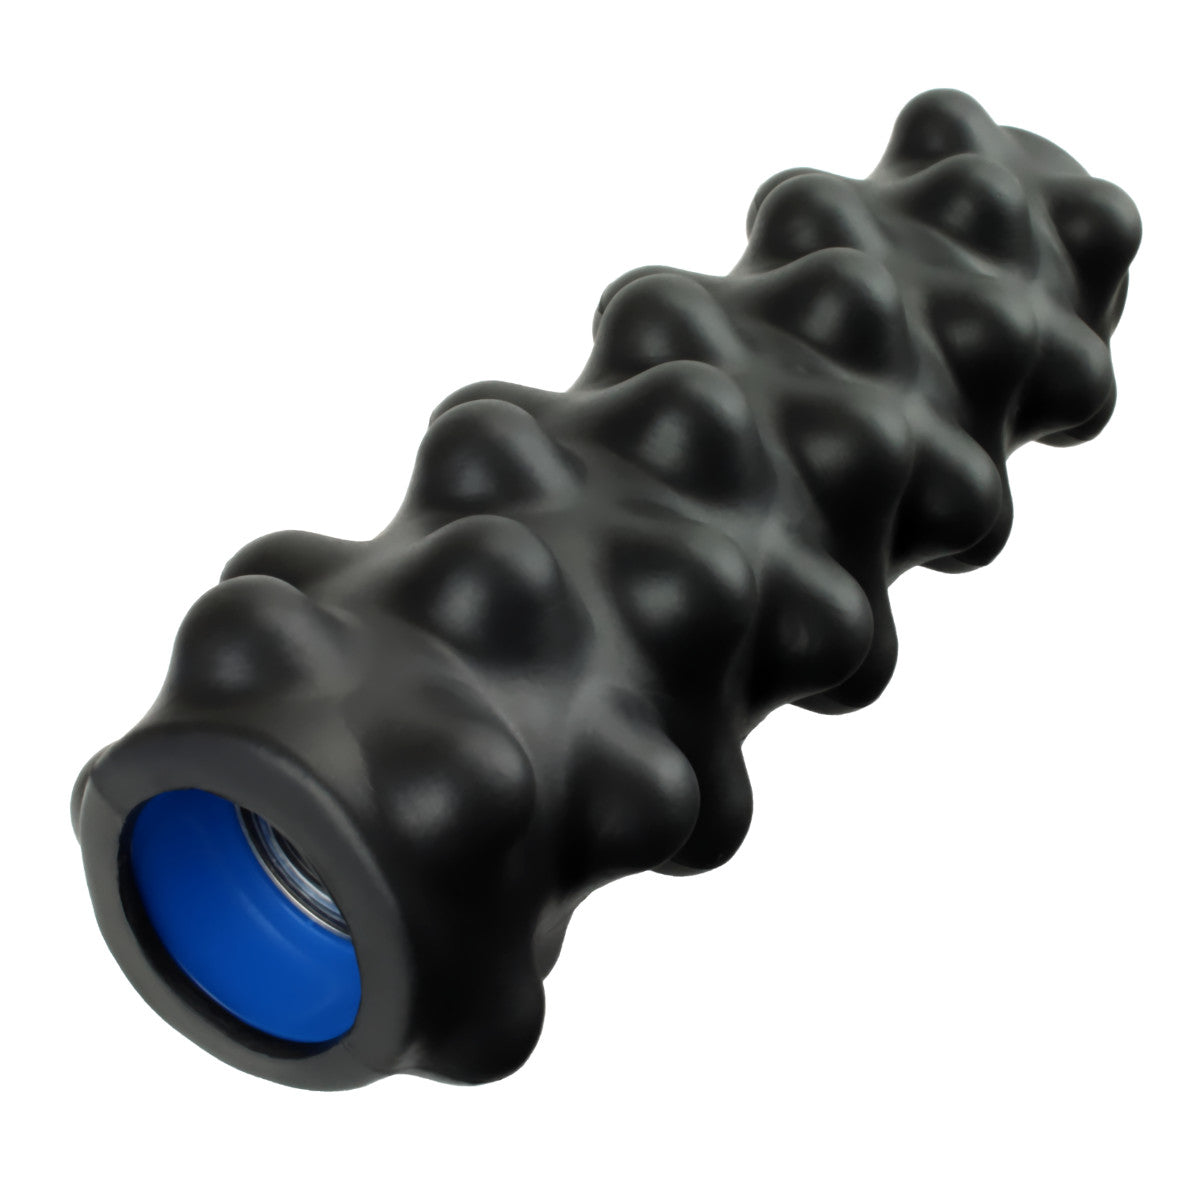 BreakUP bumpy firm-density foam roller for use with DoubleUP frame